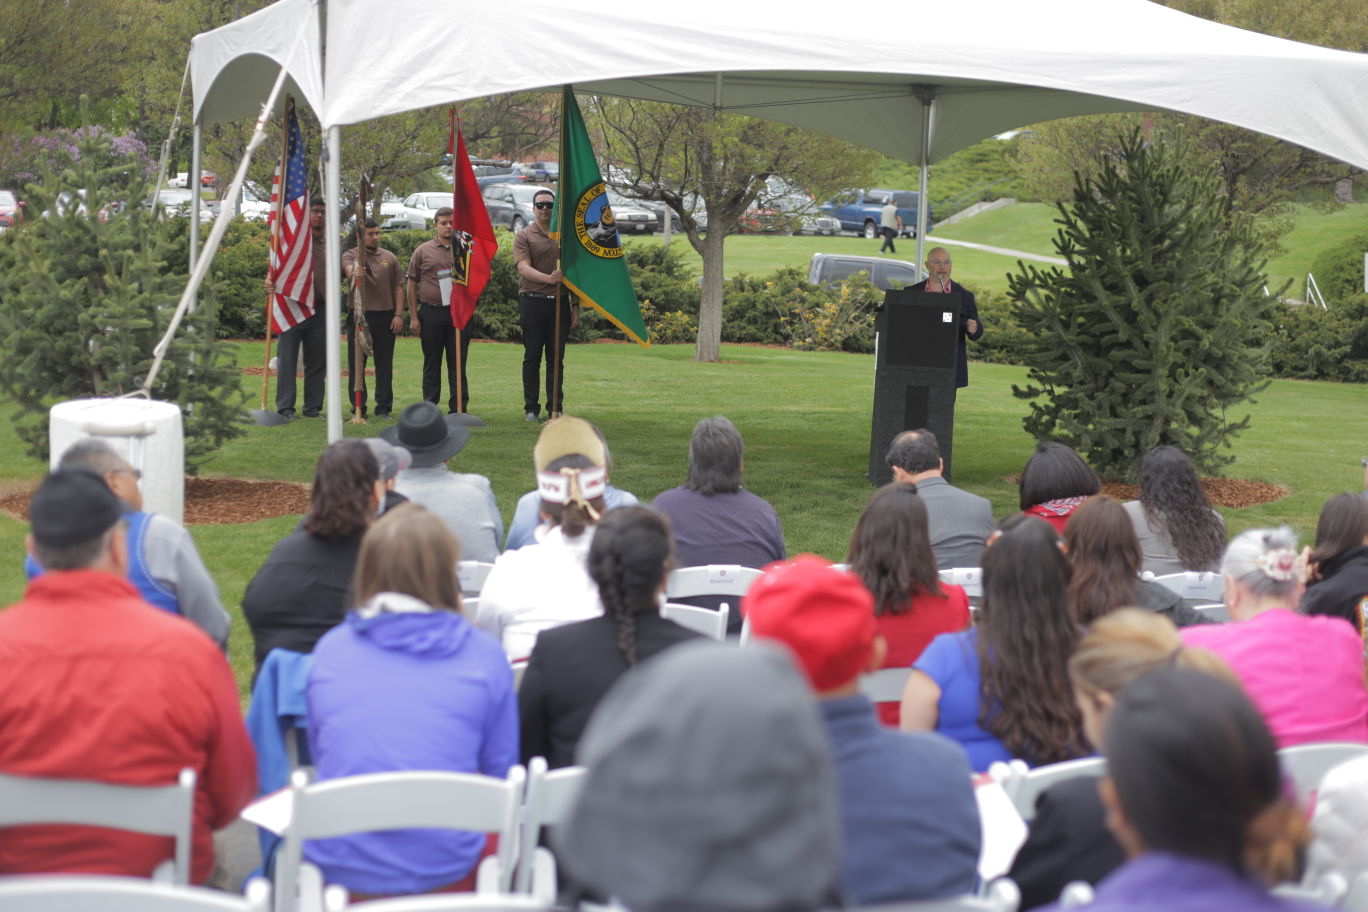 Mark Sindell, director of business development at GGLO Design, the company designing the Elson S. Floyd Cultural Center, speaks at a Nez Perce blessing ceremony for the center on Thursday.